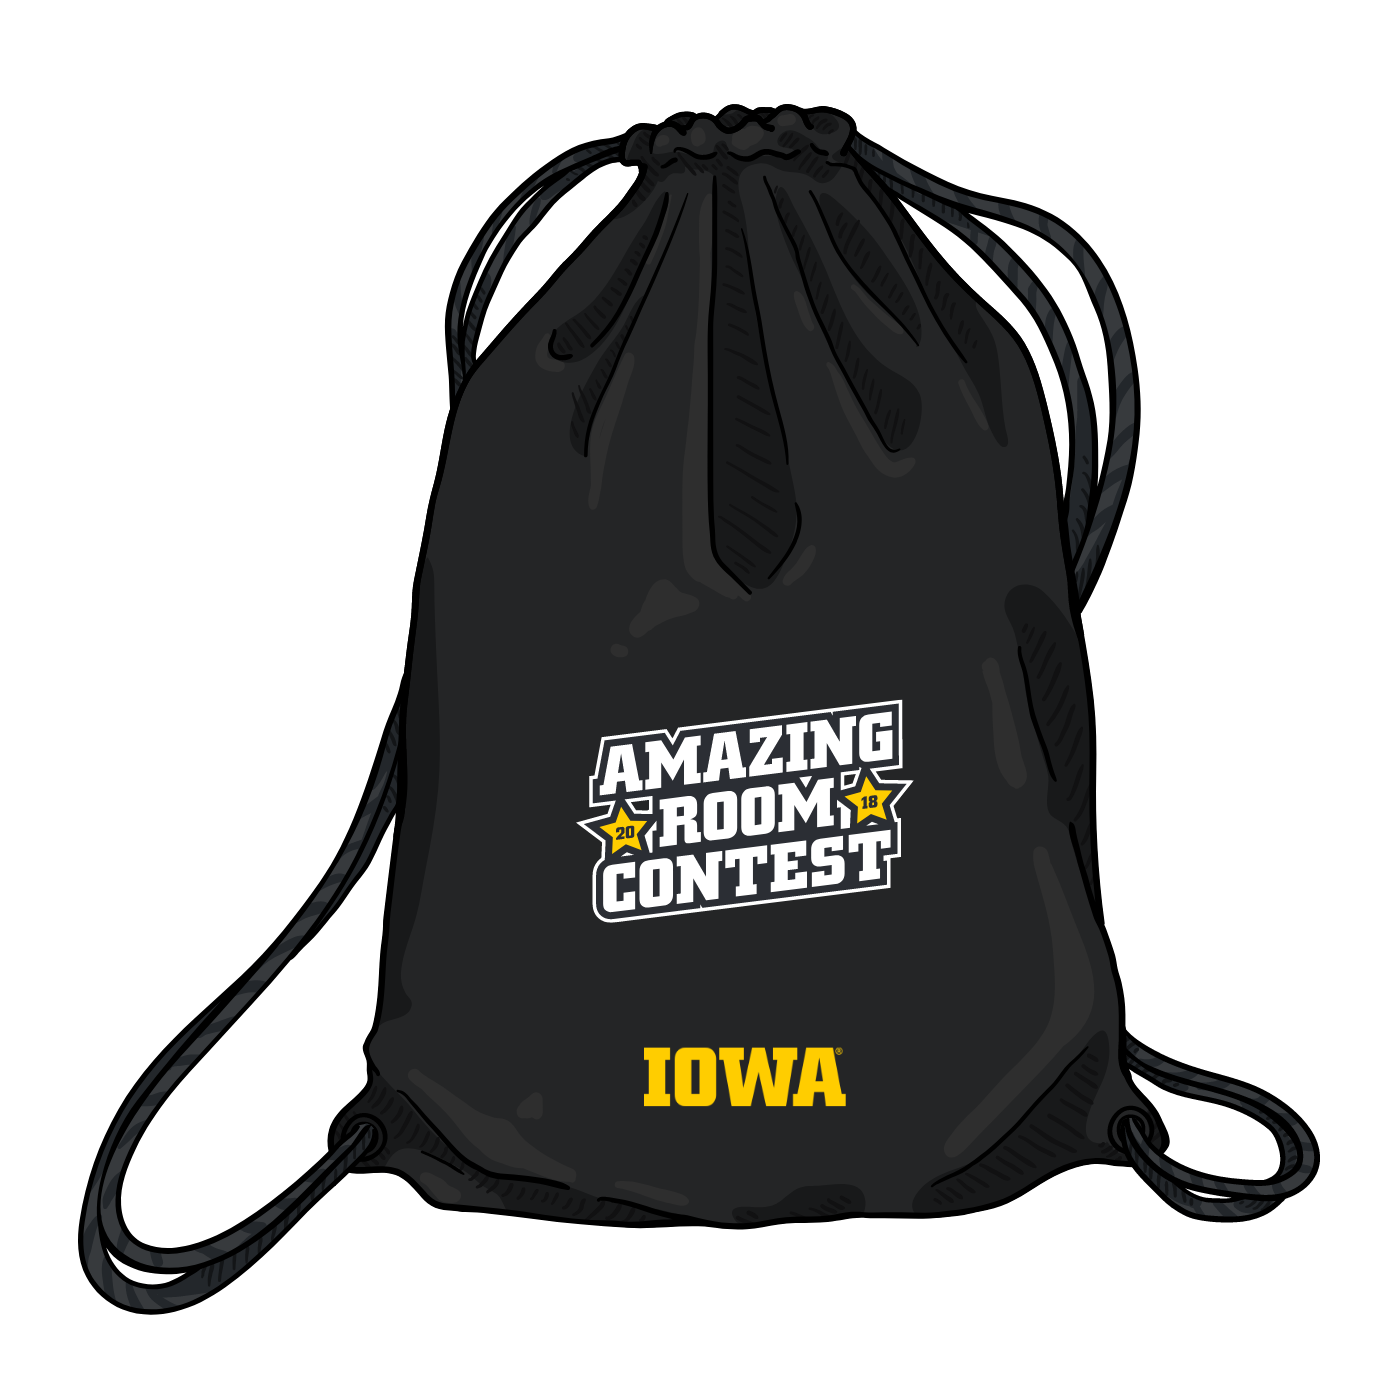 Amazing Room Contest graphic shown on drawstring bag with block IOWA logo separately at the bottom